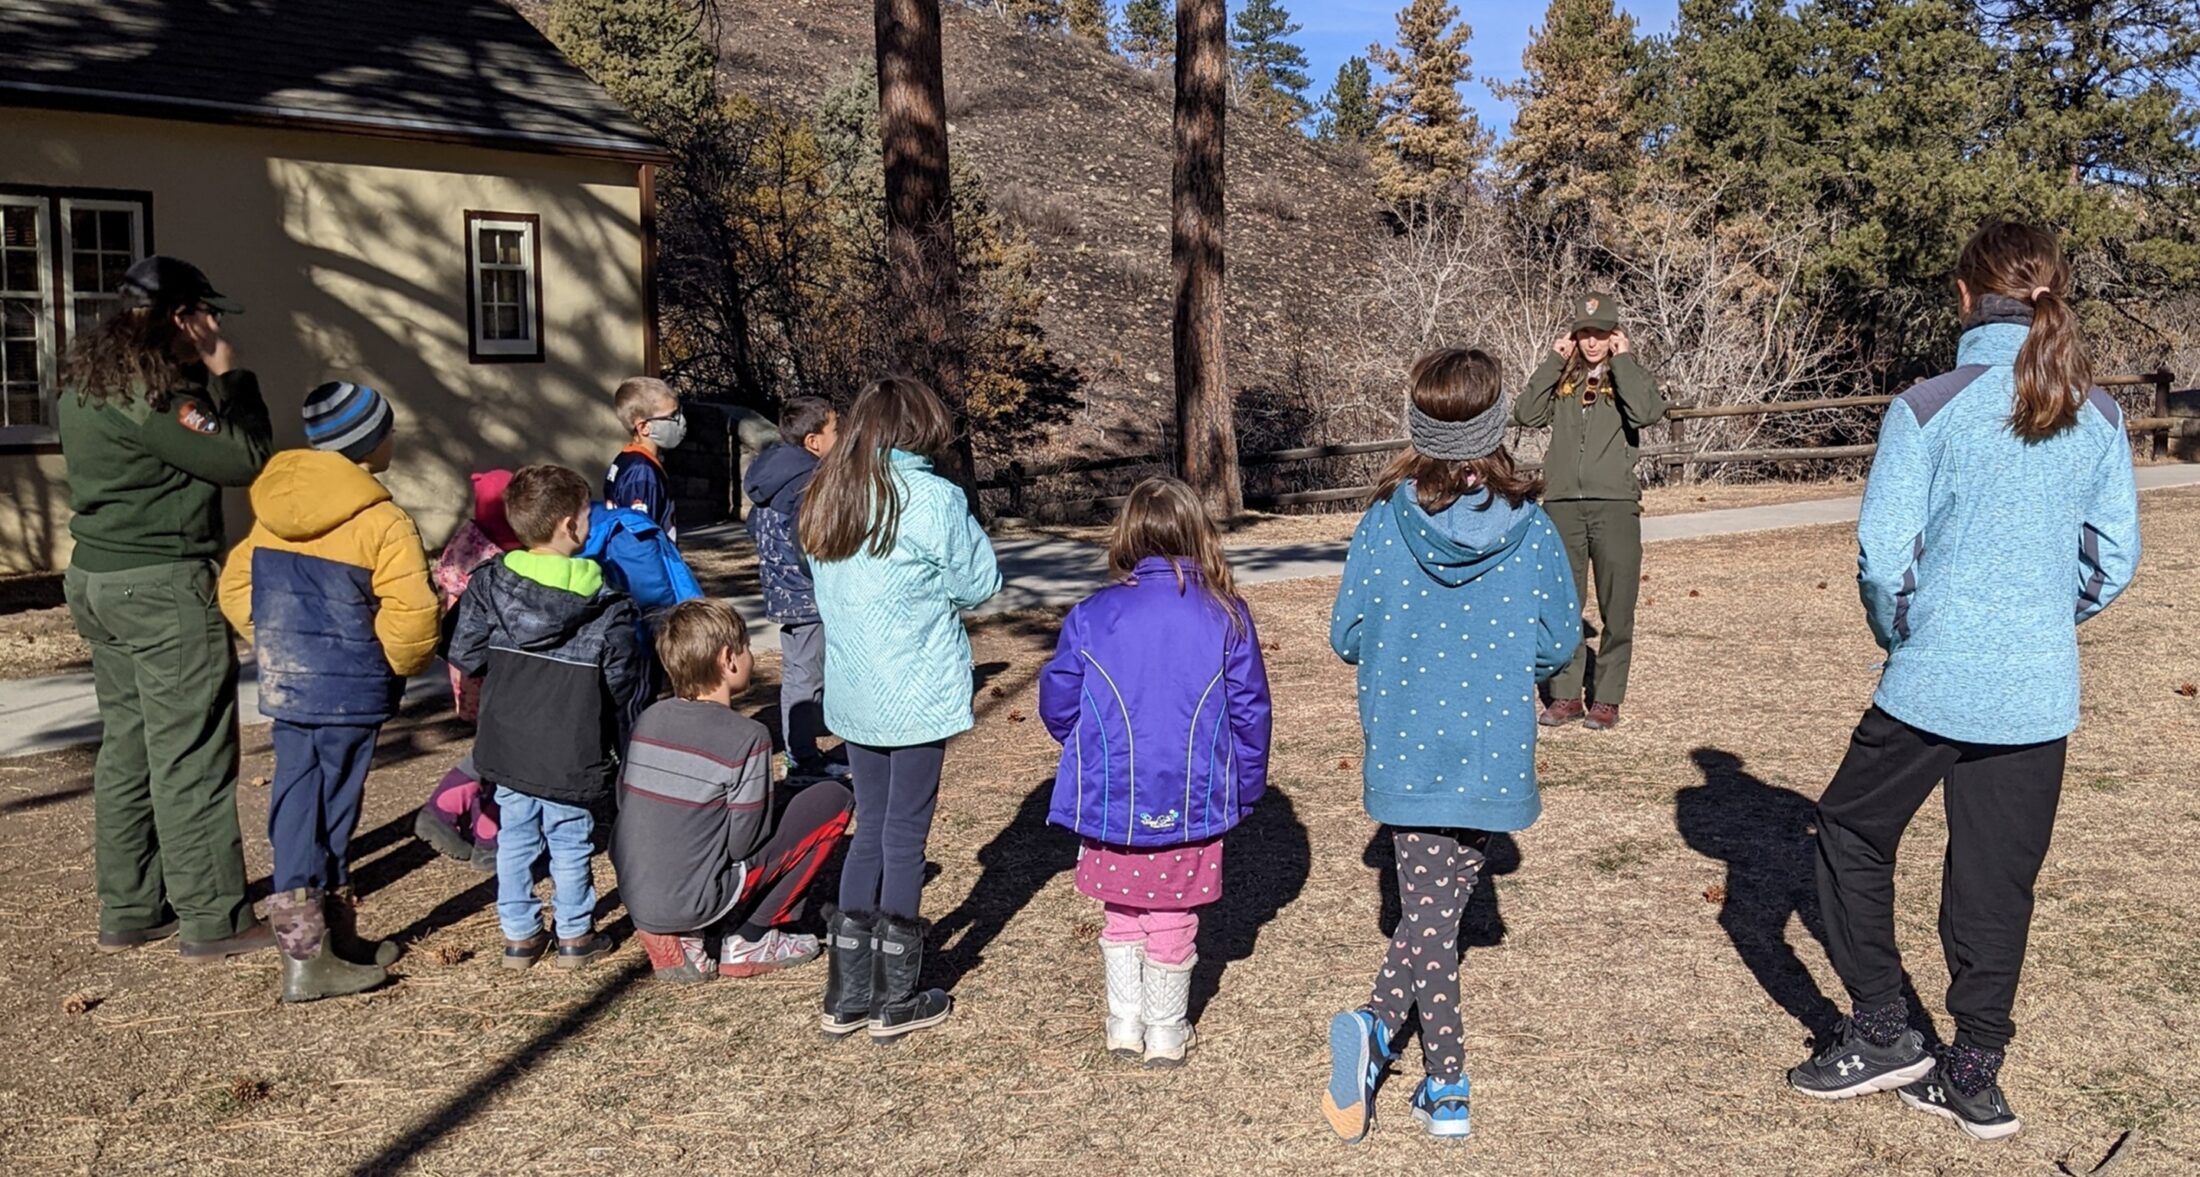 Young children with their backs to the camera dressed in winter coats standing on a brown lawn looking at a ranger in a green uniform who is talking to them. In the background is the corner of a yellow building with trees and a black hillside in the center of the photo.